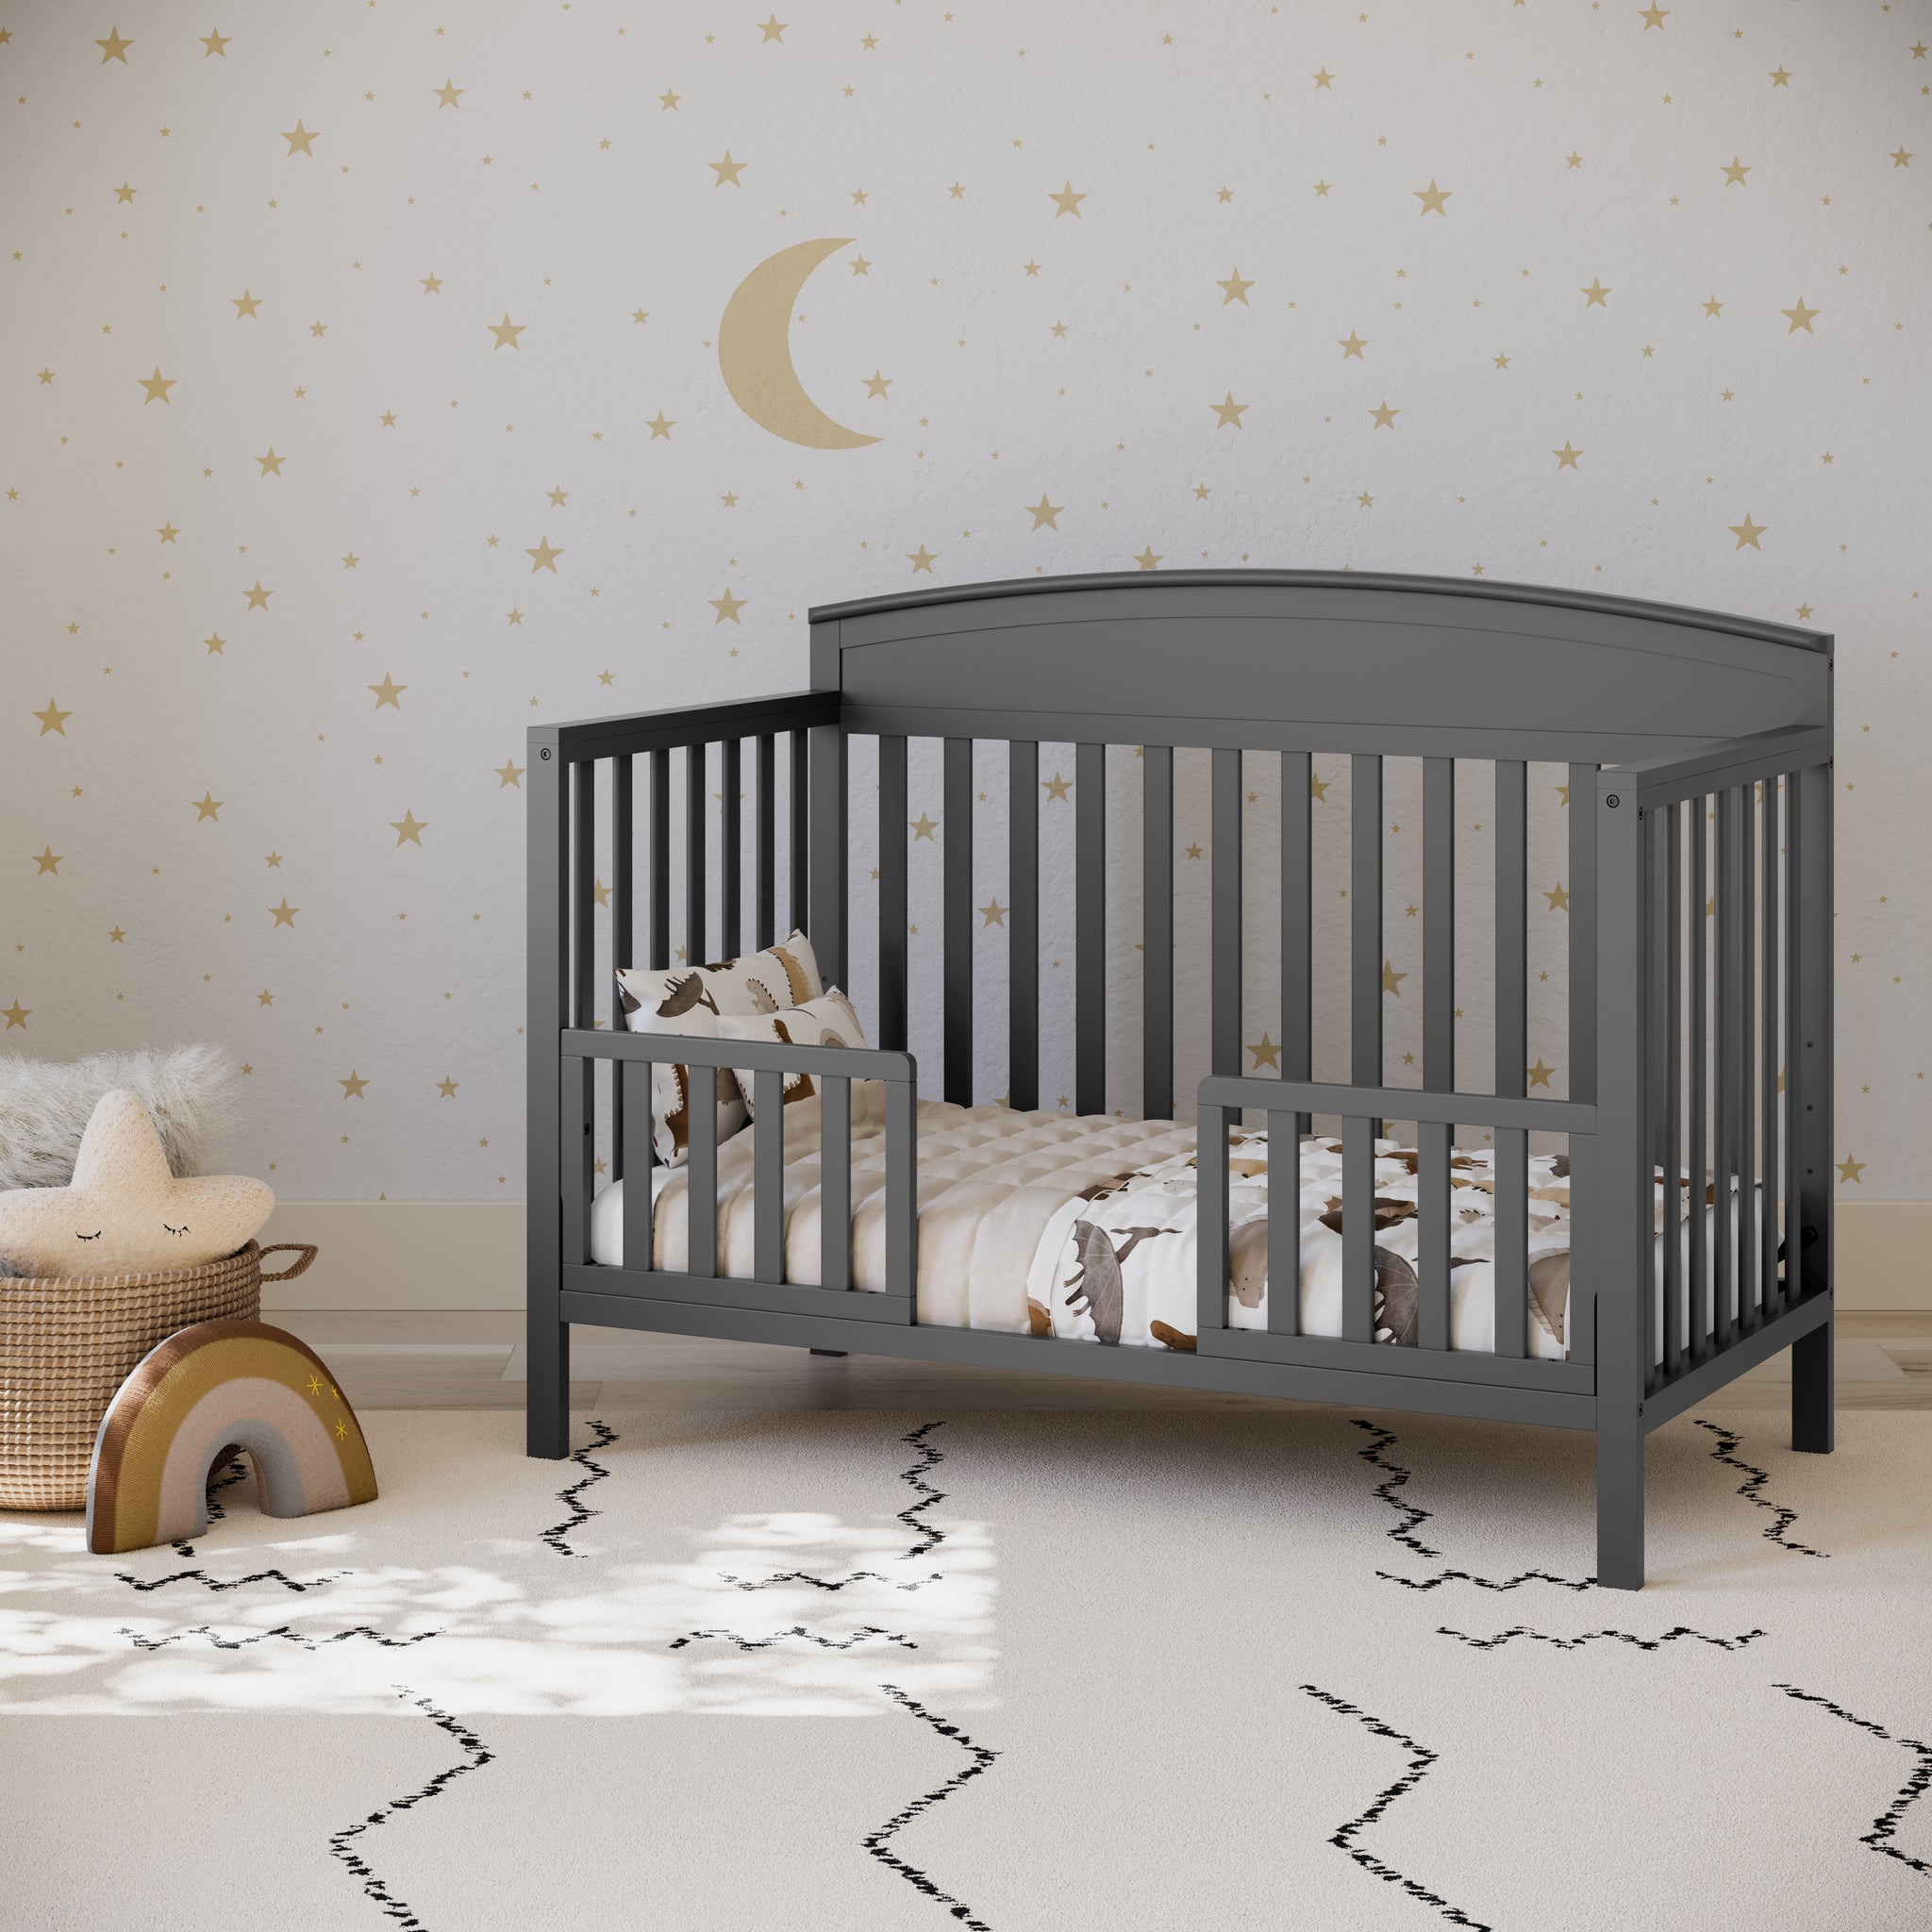 gray crib in toddler bed conversion with 2 toddler safety guardrails, in nursery